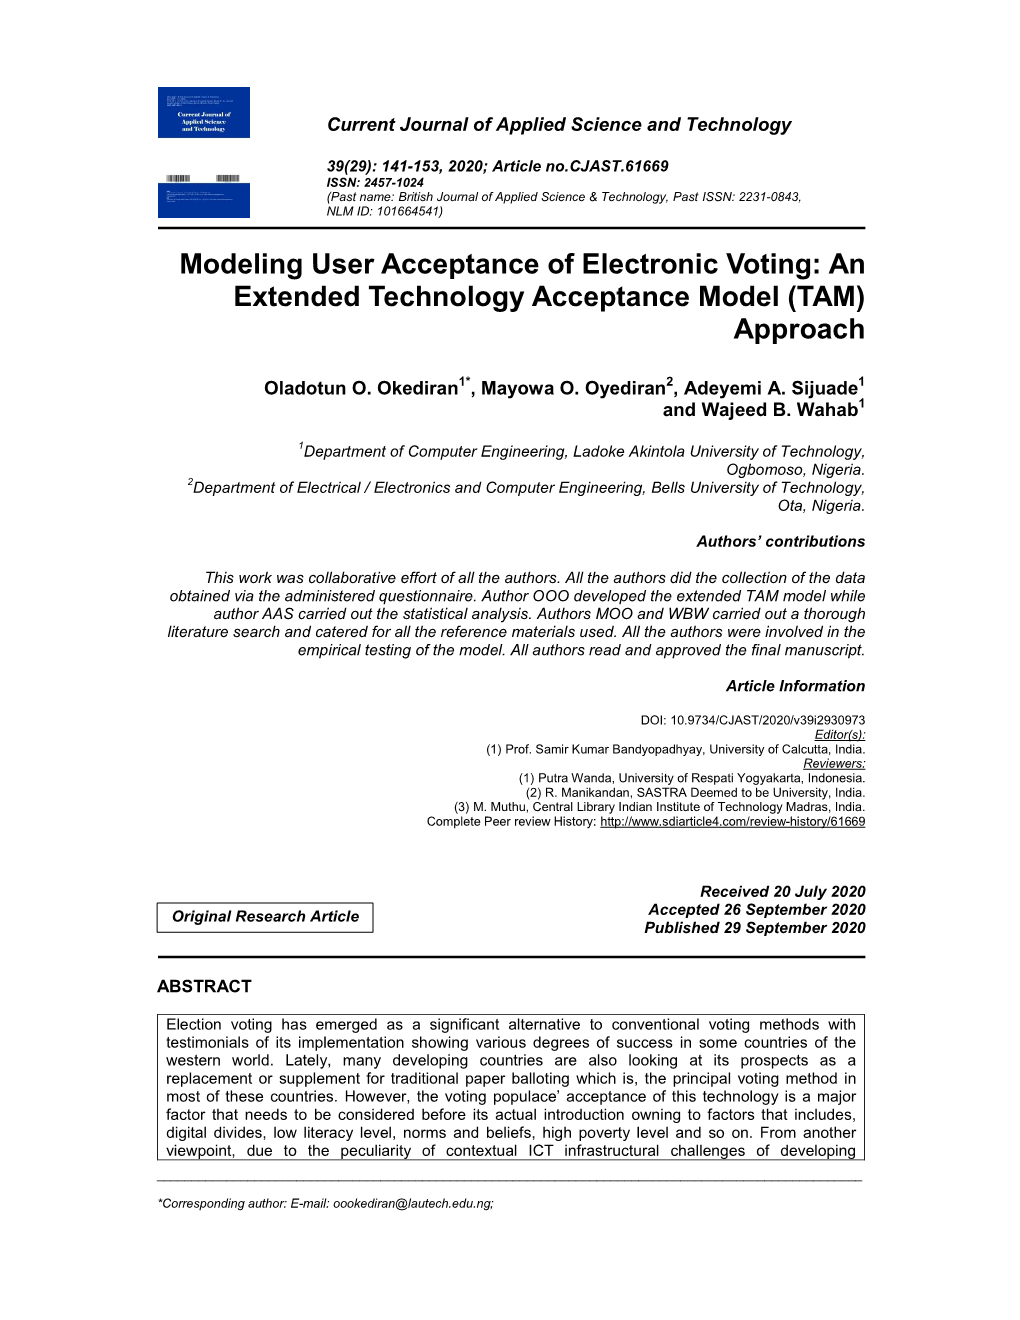 Modeling User Acceptance of Electronic Voting: an Extended Technology Acceptance Model (TAM) Approach